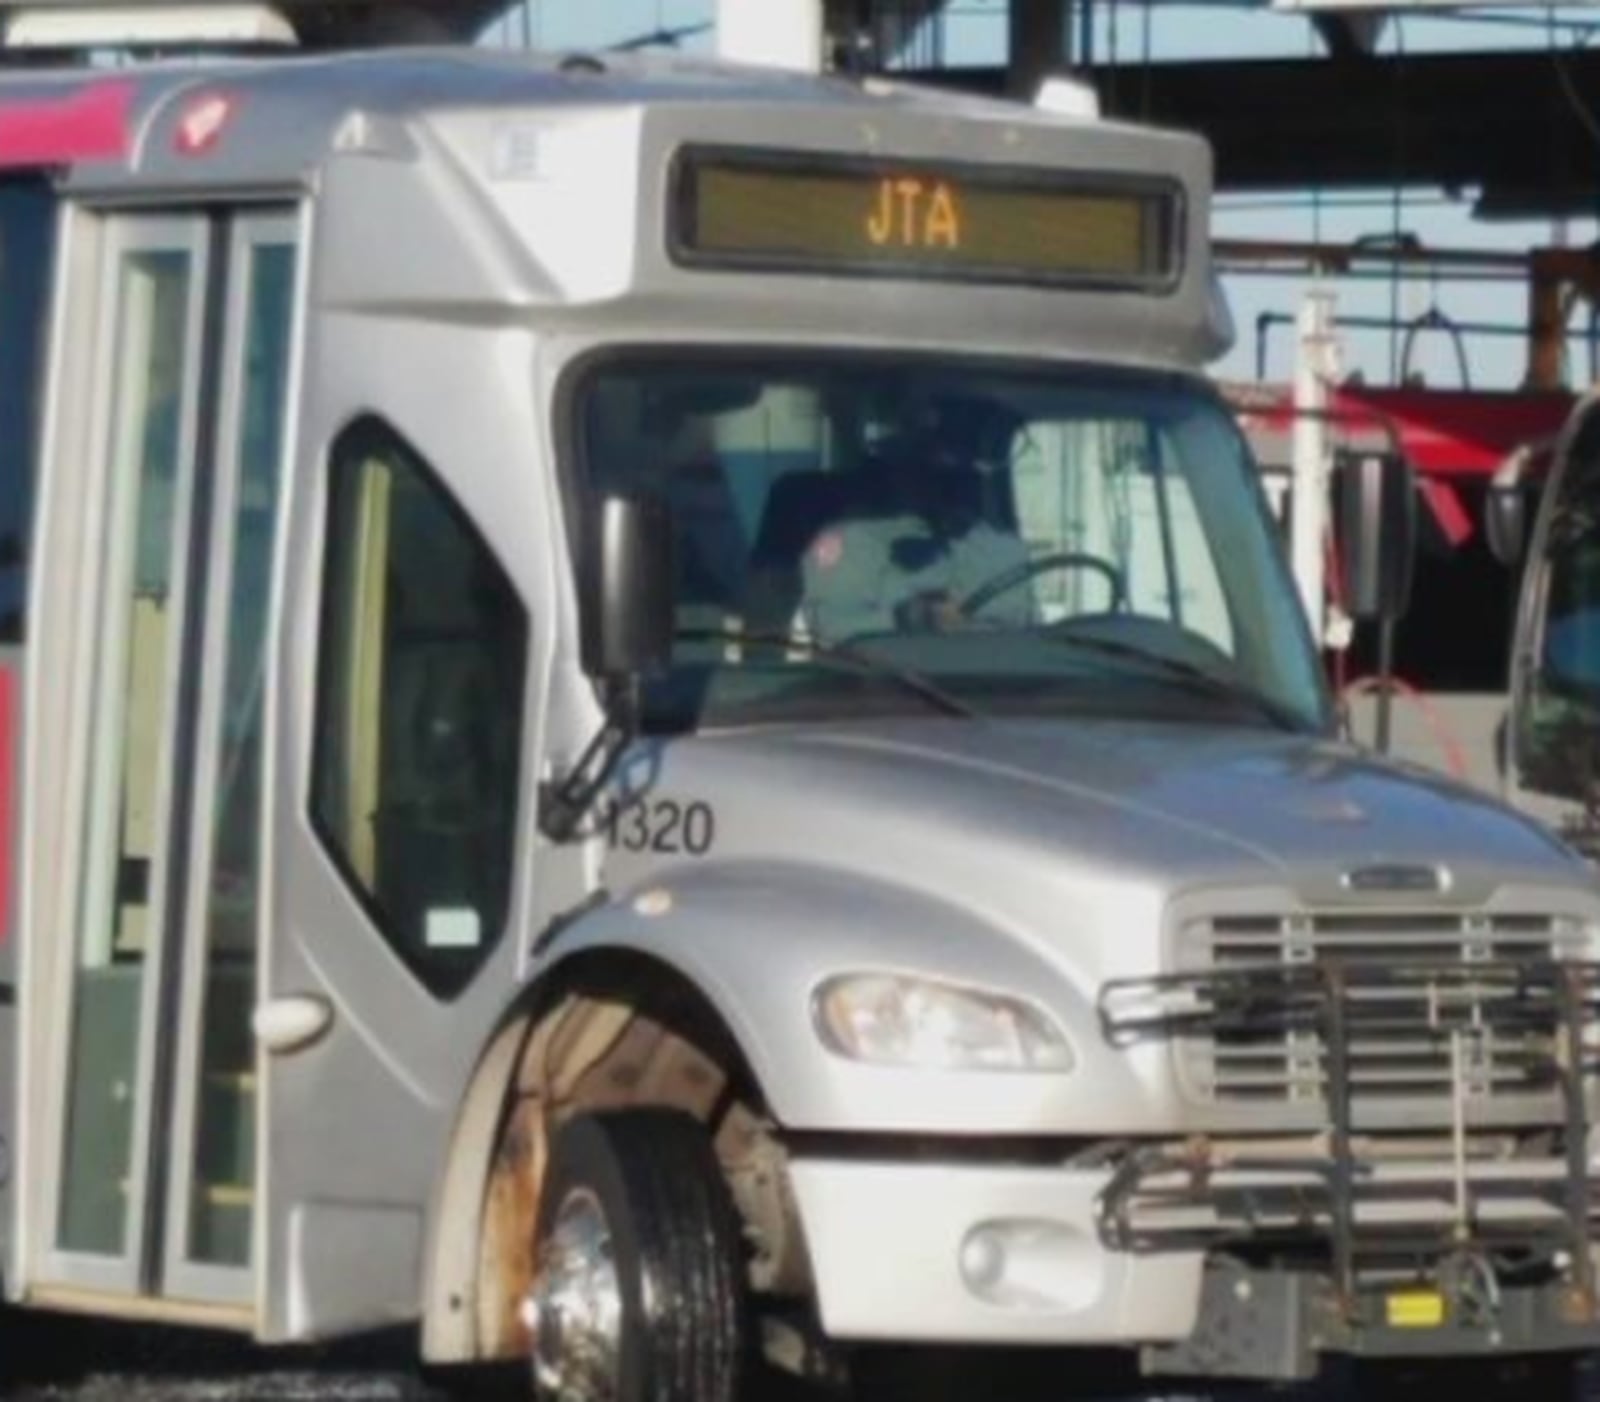 JTA bus schedule changes for Martin Luther King Jr. Holiday Action